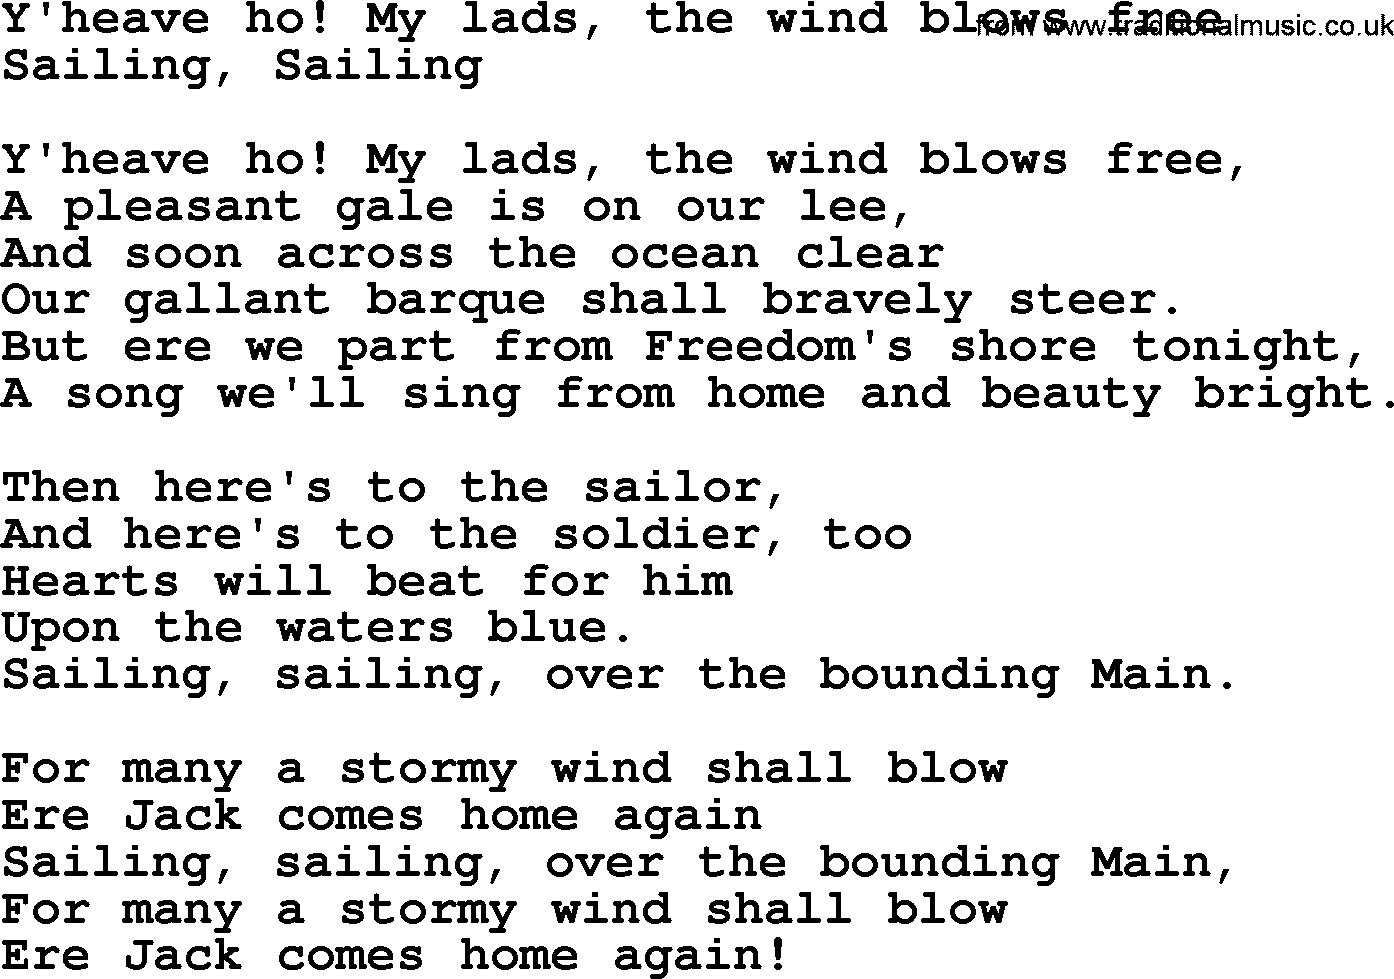 Sea Song or Shantie: Yheave Ho My Lads The Wind Blows Free, lyrics